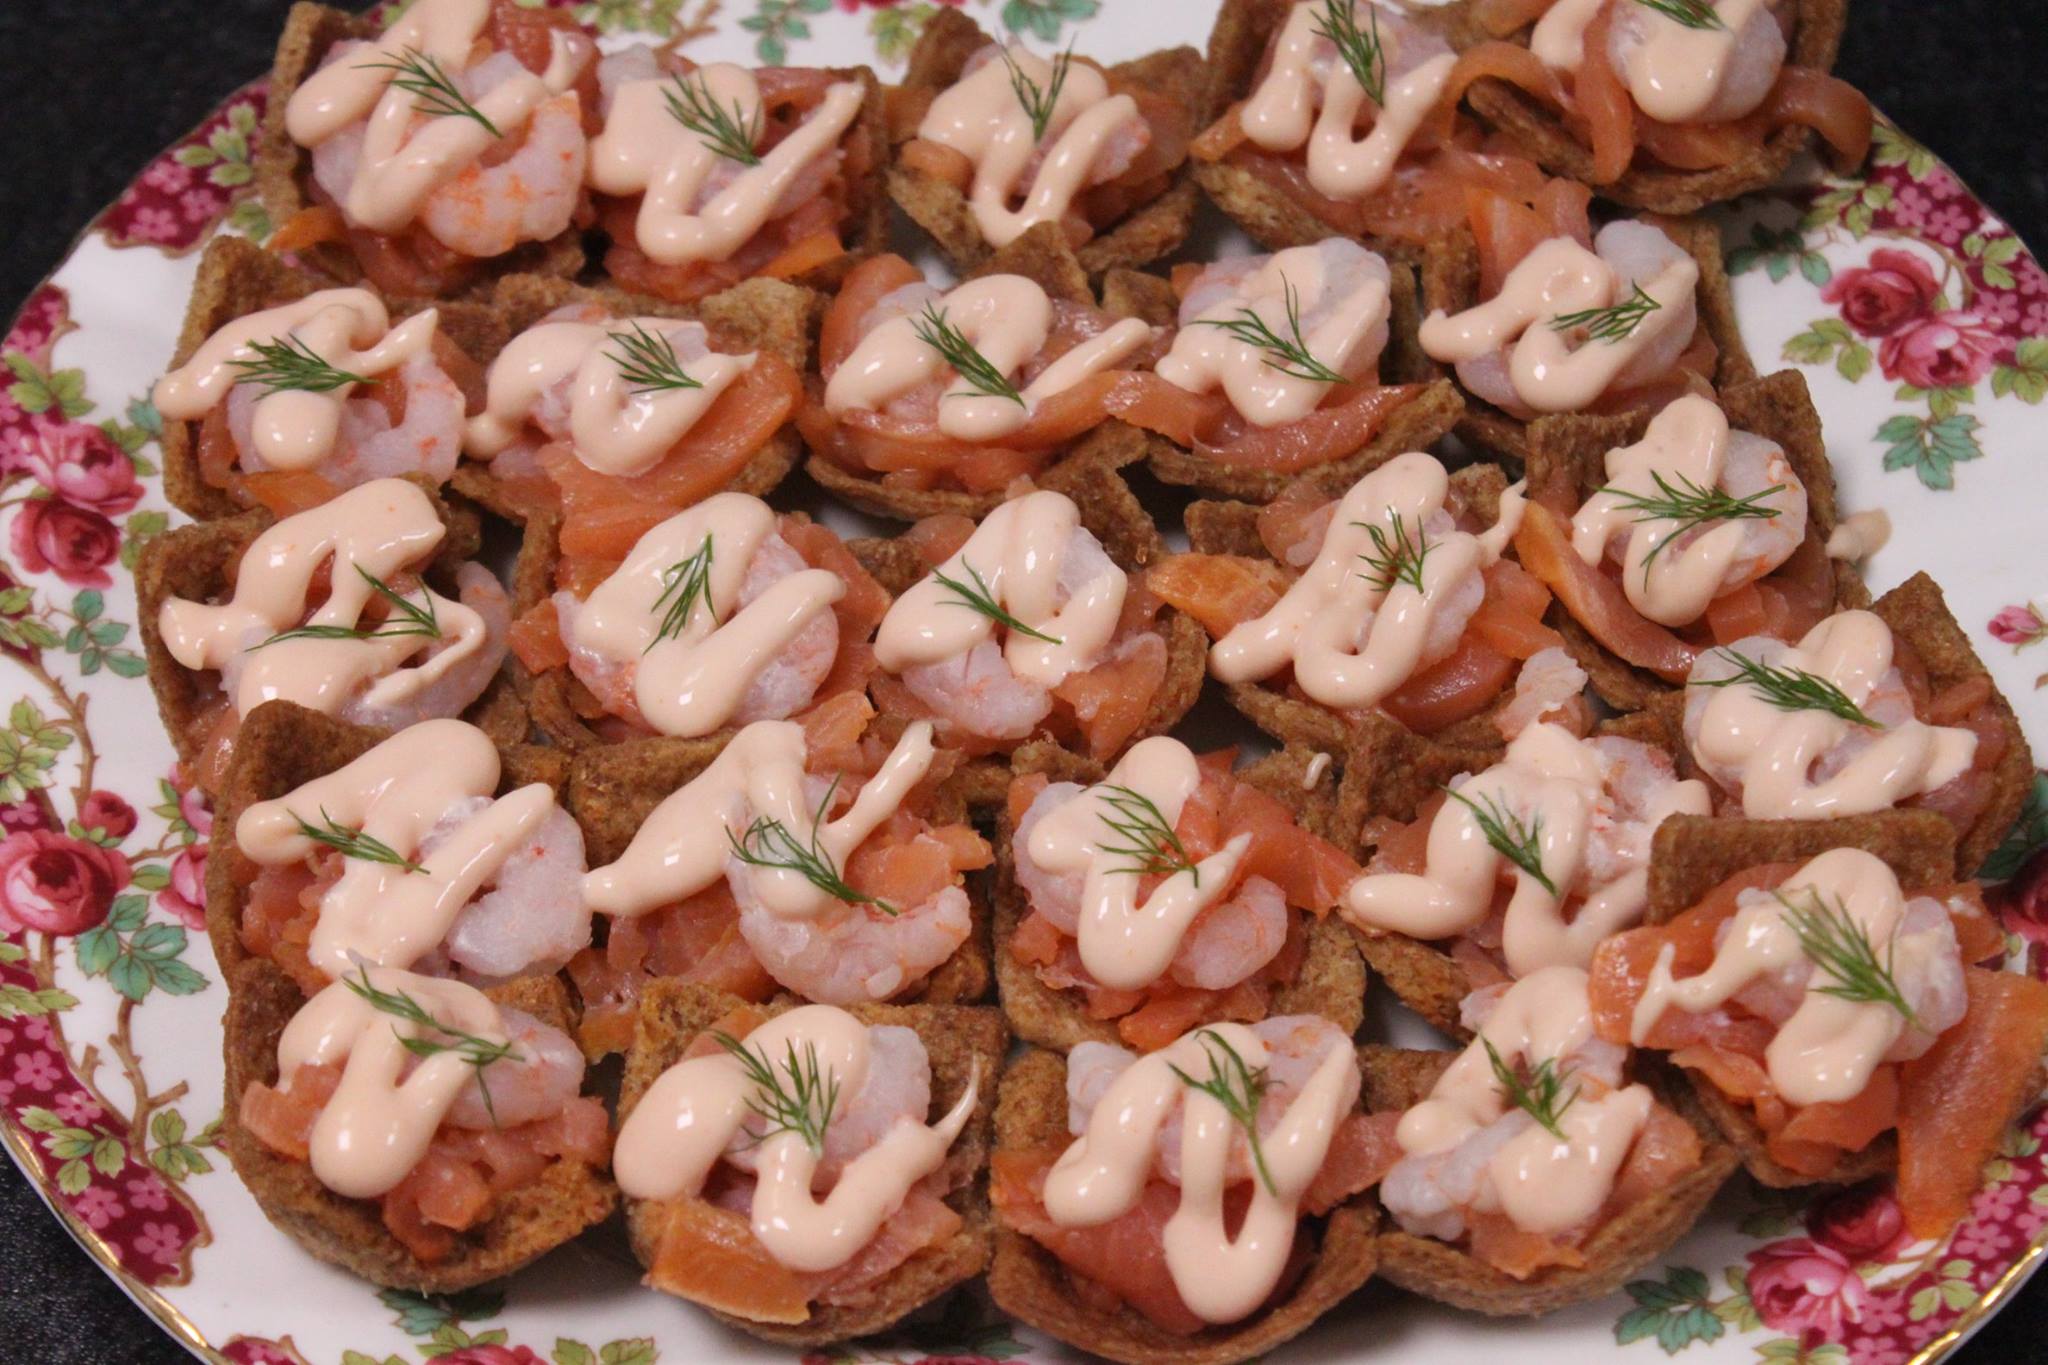 Smoke salmon, prawns and marie rose sauce in a bread basket canapes.